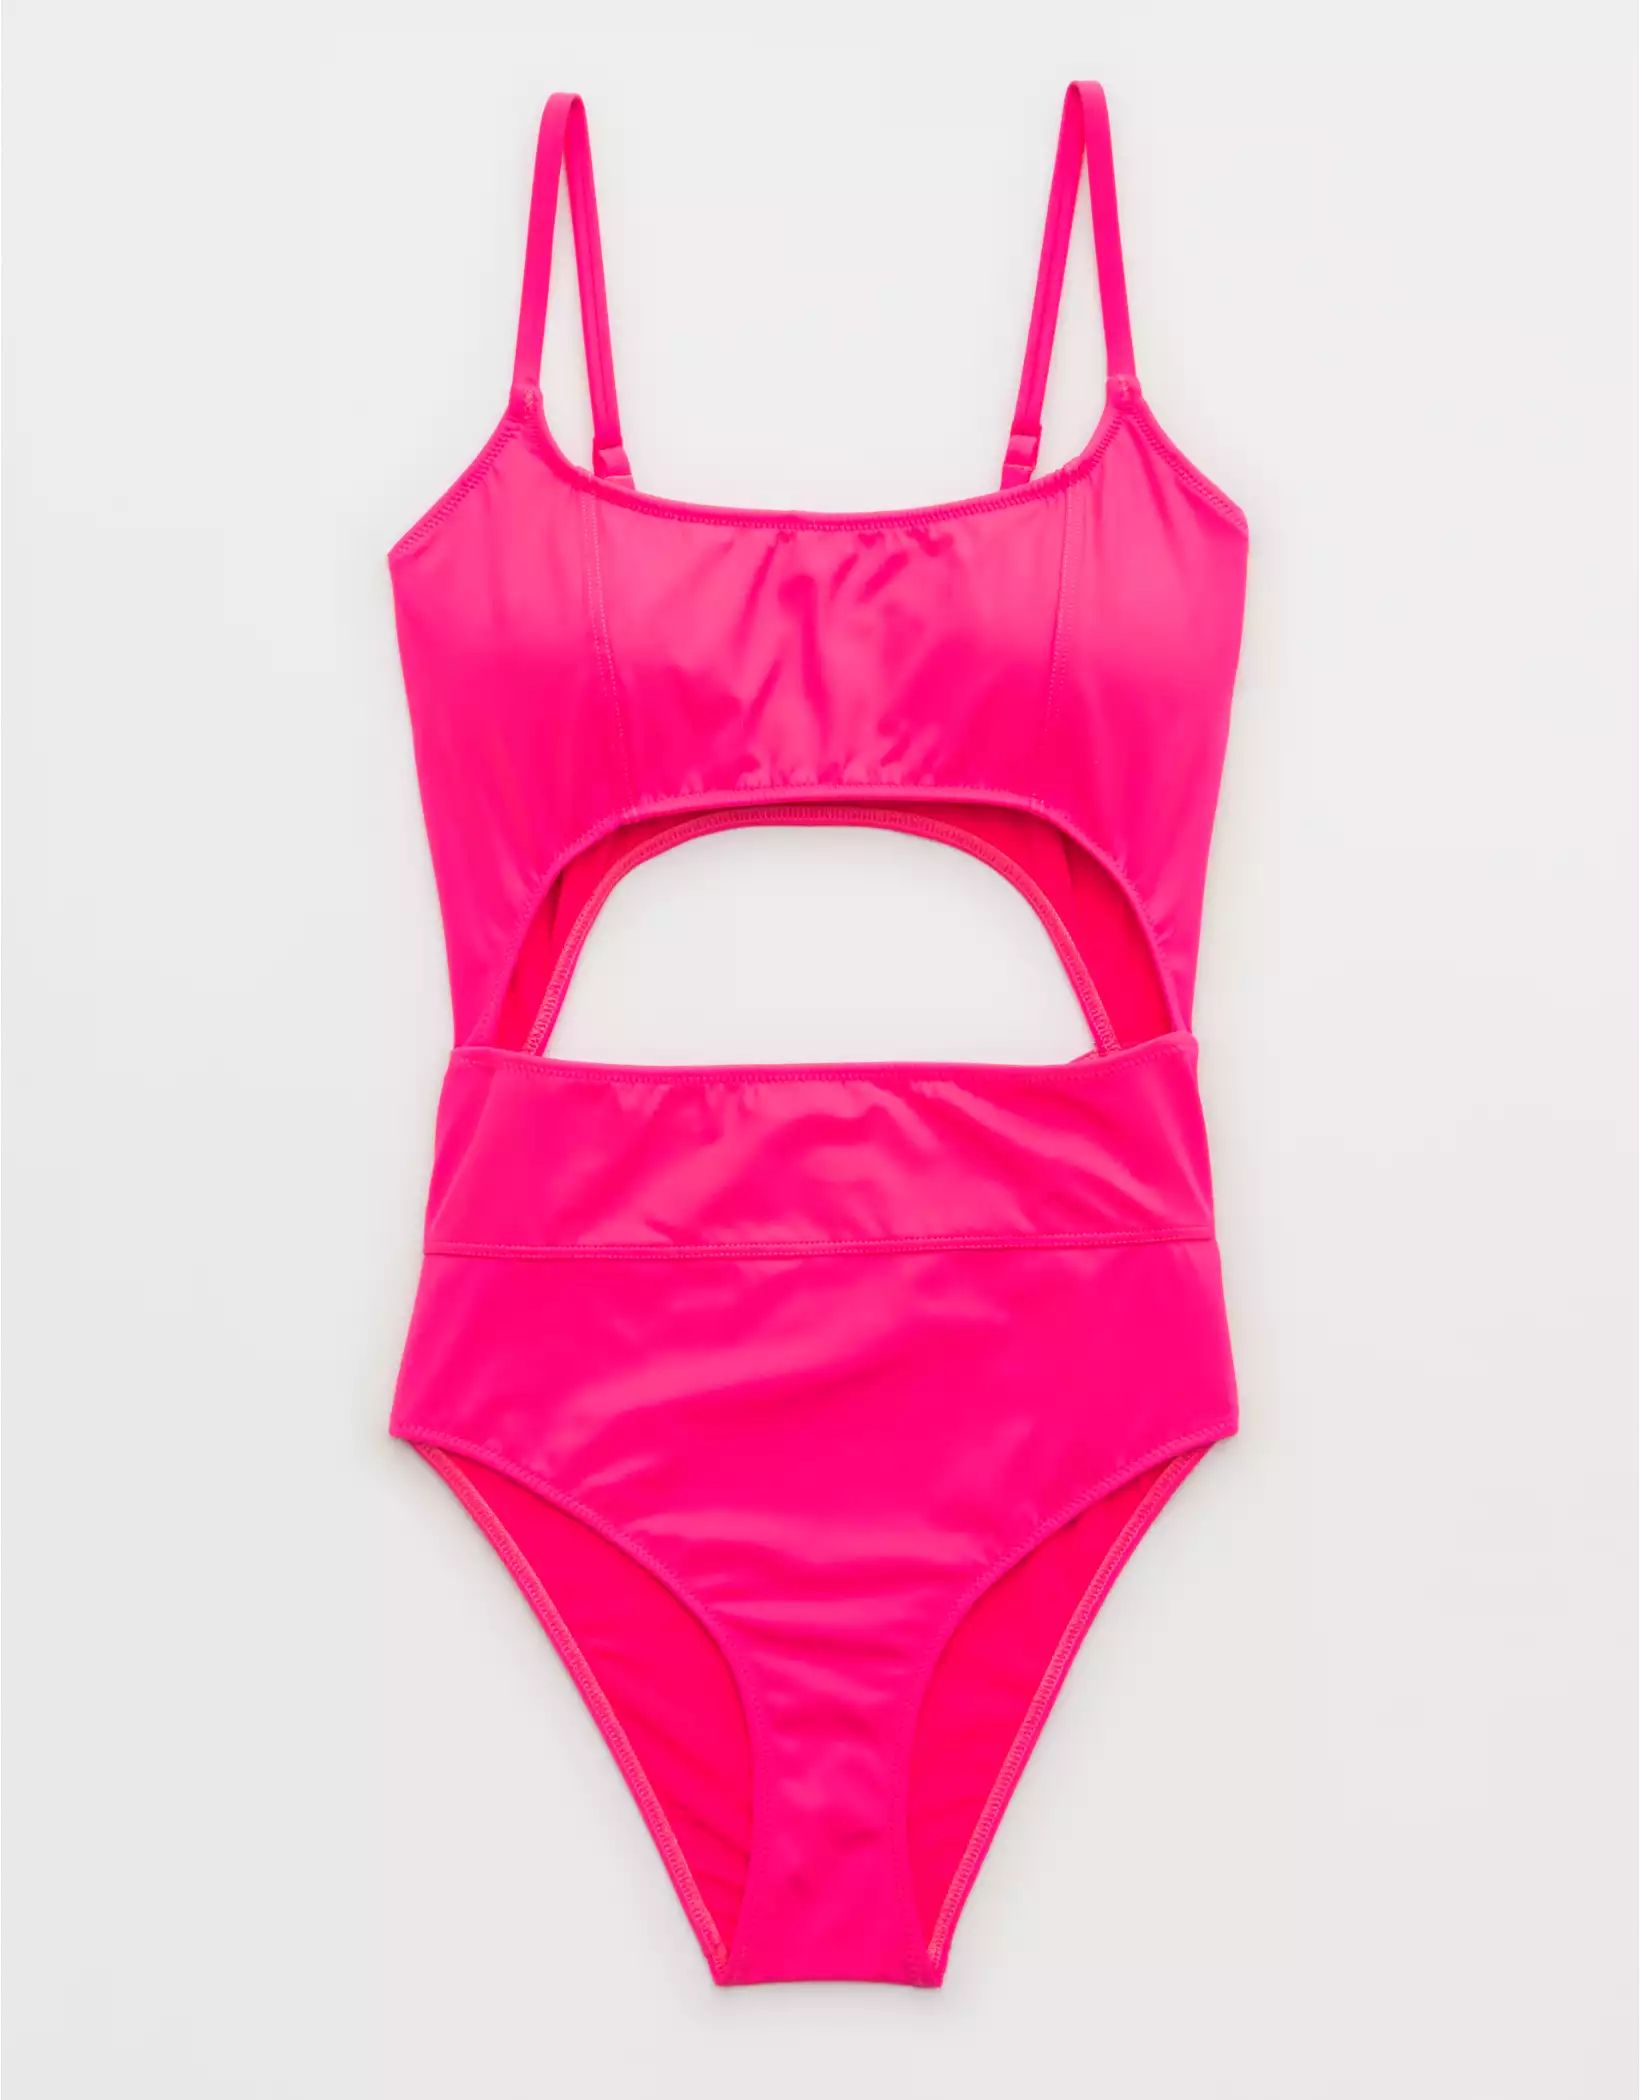 Aerie Seamed Cut Out One Piece Swimsuit | Aerie